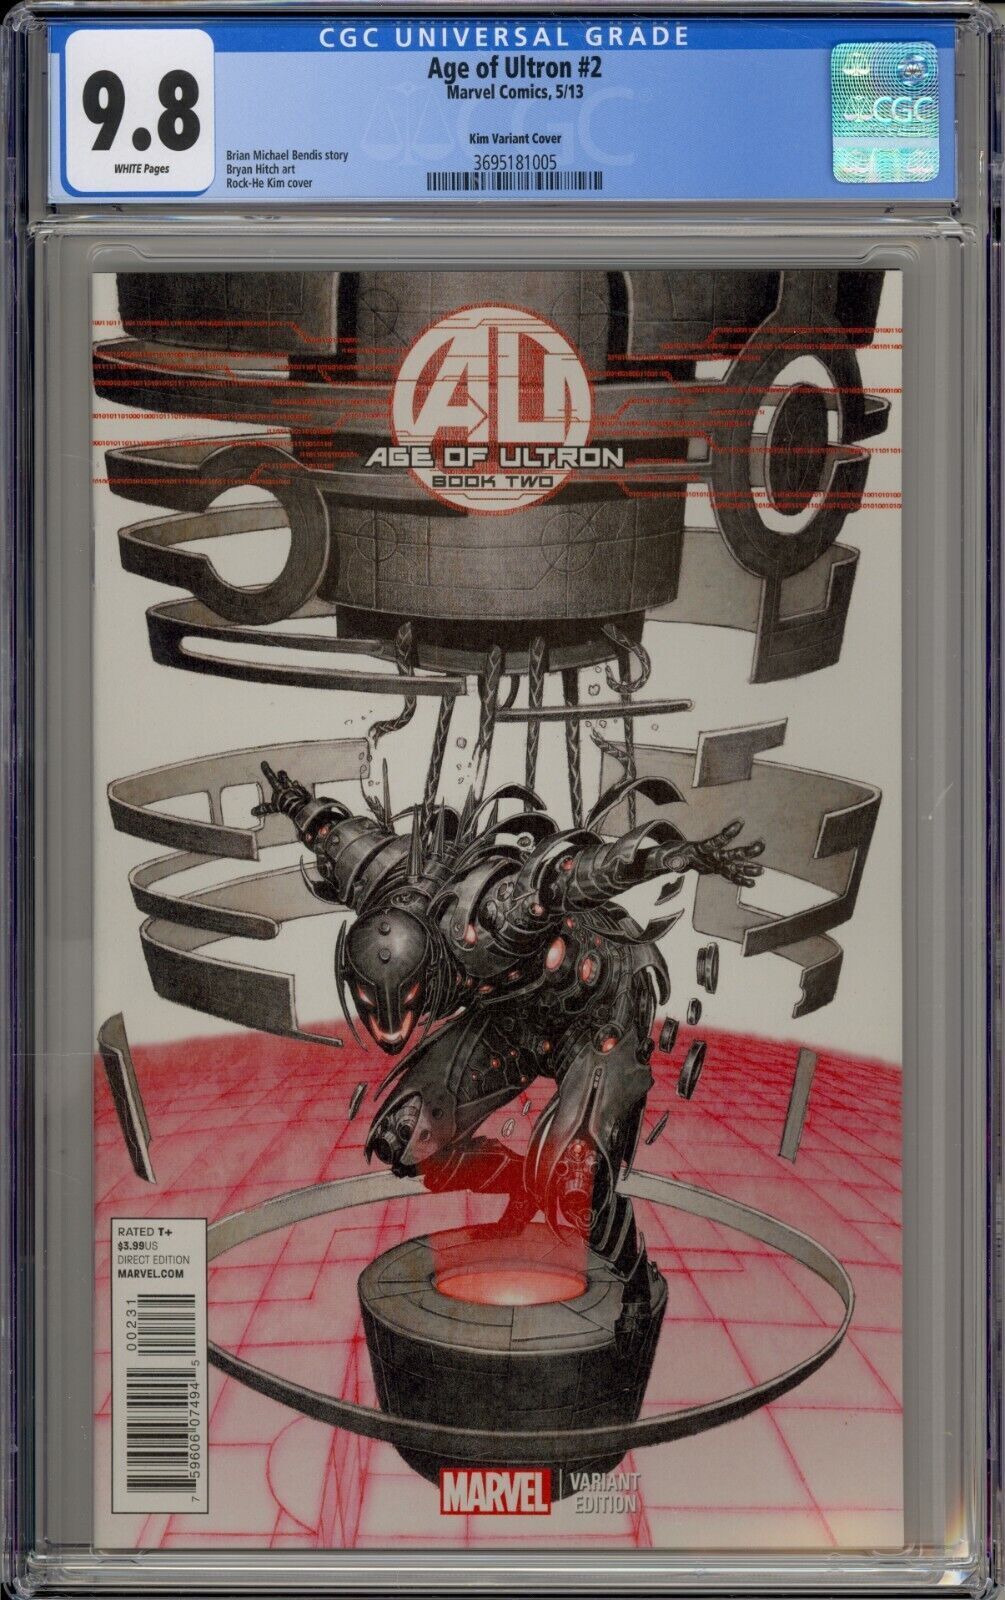 AGE OF ULTRON #2 - BOOK TWO - CGC 9.8 - ROCK-HE KIM VARIANT - BRYAN HITCH ART